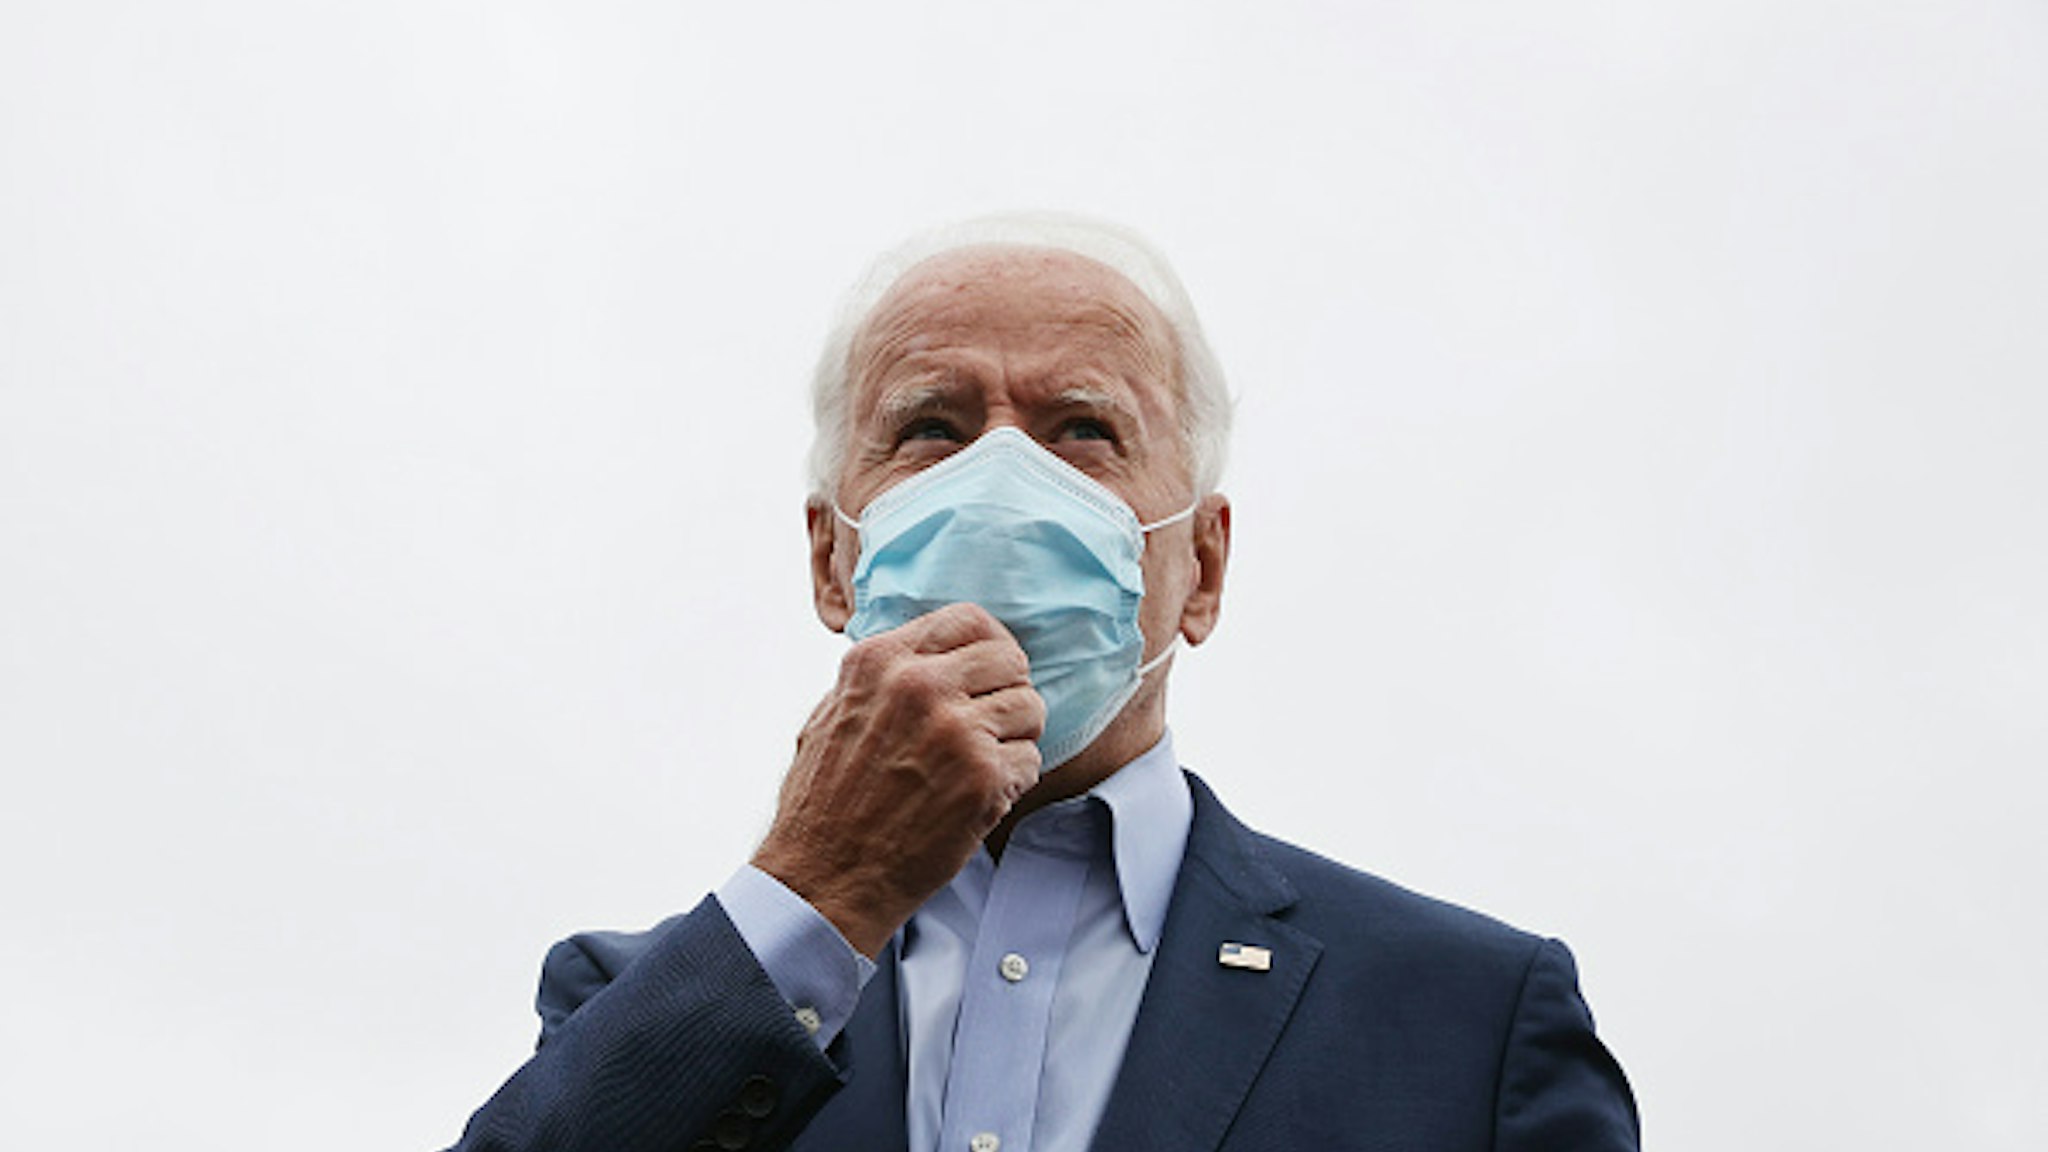 NEW CASTLE, DELAWARE - OCTOBER 12: Wearing a face mask to reduce the risk posed by the coronavirus, Democratic presidential nominee Joe Biden talks to reporters before boarding a flight to Ohio at New Castle County Airport October 12, 2020 in New Castle, Delaware. With 21 days until the election, Biden will campaign in Toledo and Cincinnati.